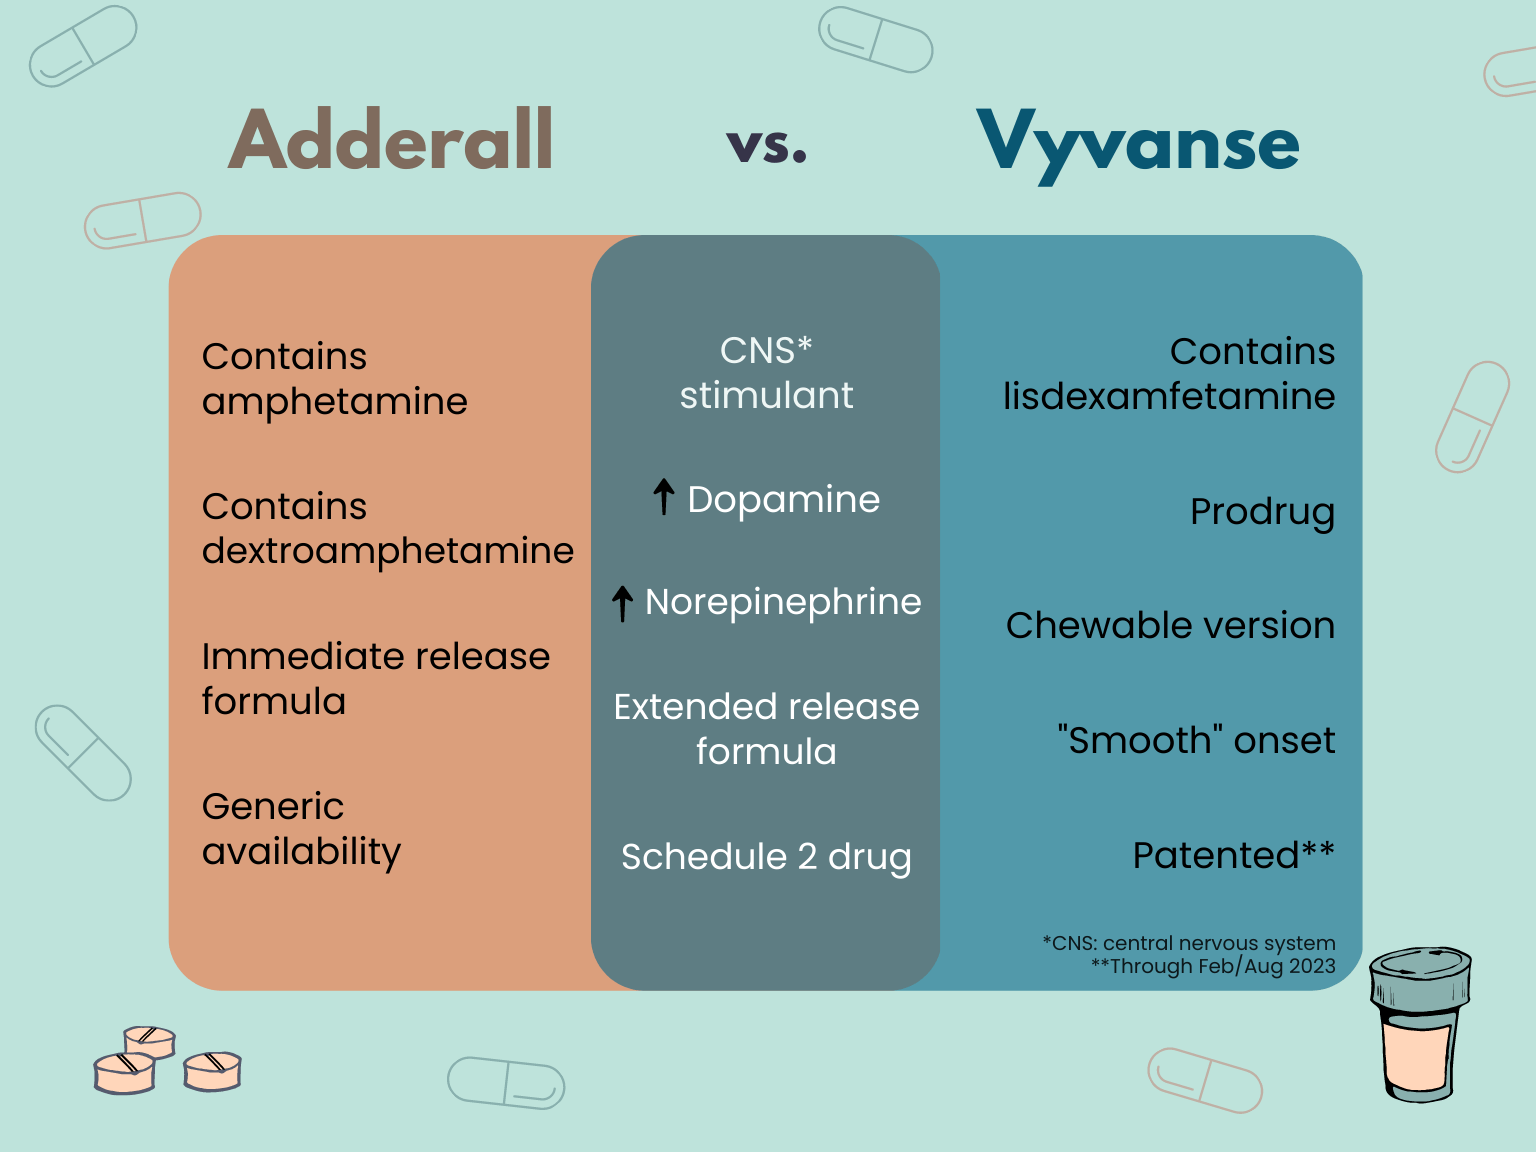 venn diagram comparing adderall and vyvanse. On the adderall side: contains amphetamine, contains dextroamphetamine, immediate release formula, generic availability. on the vyvanse side: contains lisdexamfetamine, prodrug, chewable version, smooth onset, patented. in the middle: cns stimulant, increases dopamine and norepinephrine, extended release formula, schedule 2 drug